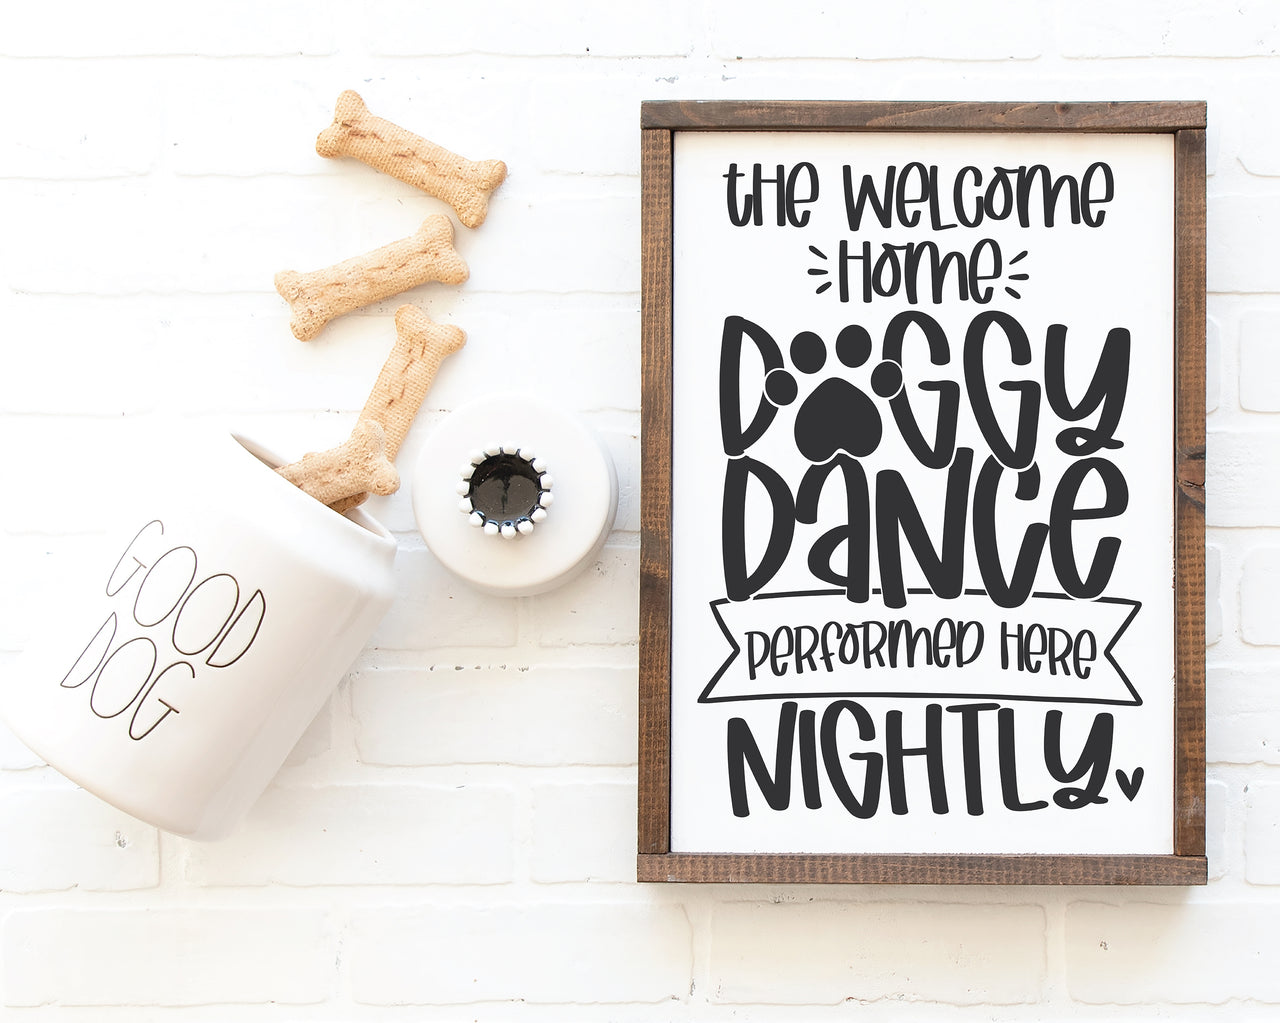 Welcome Home Doggy Dance Performed Here Nightly SVG